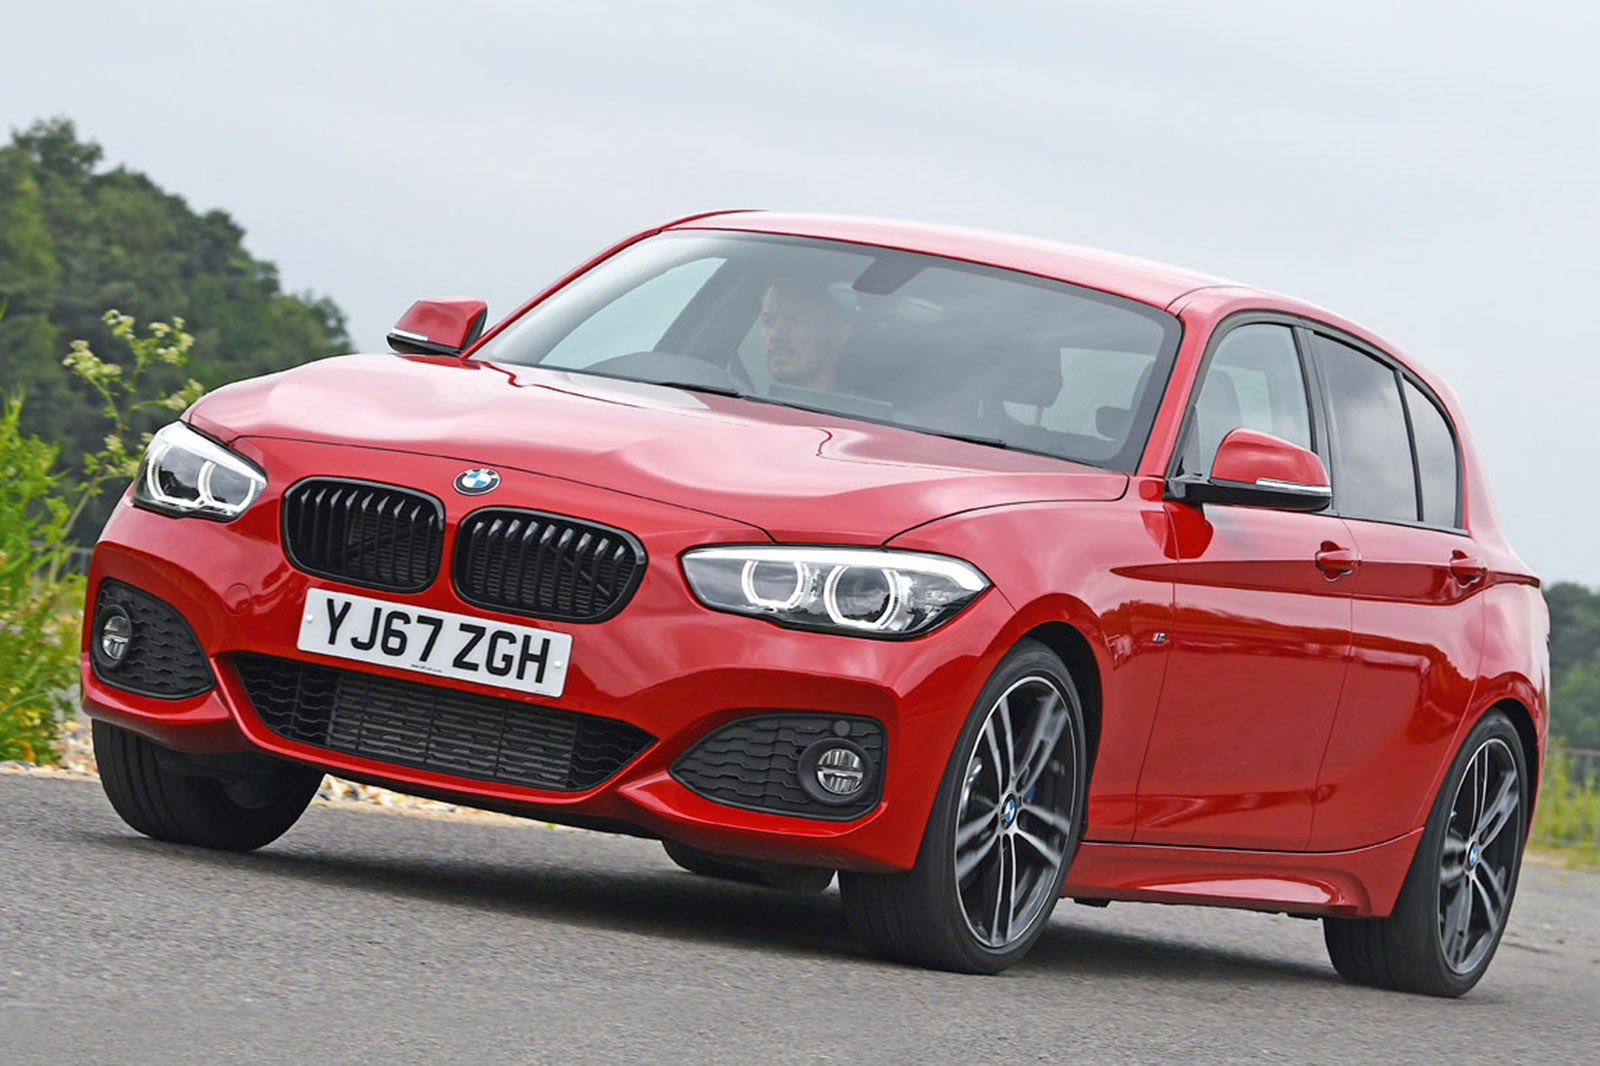 Nearly new buying guide: BMW 1 Series |